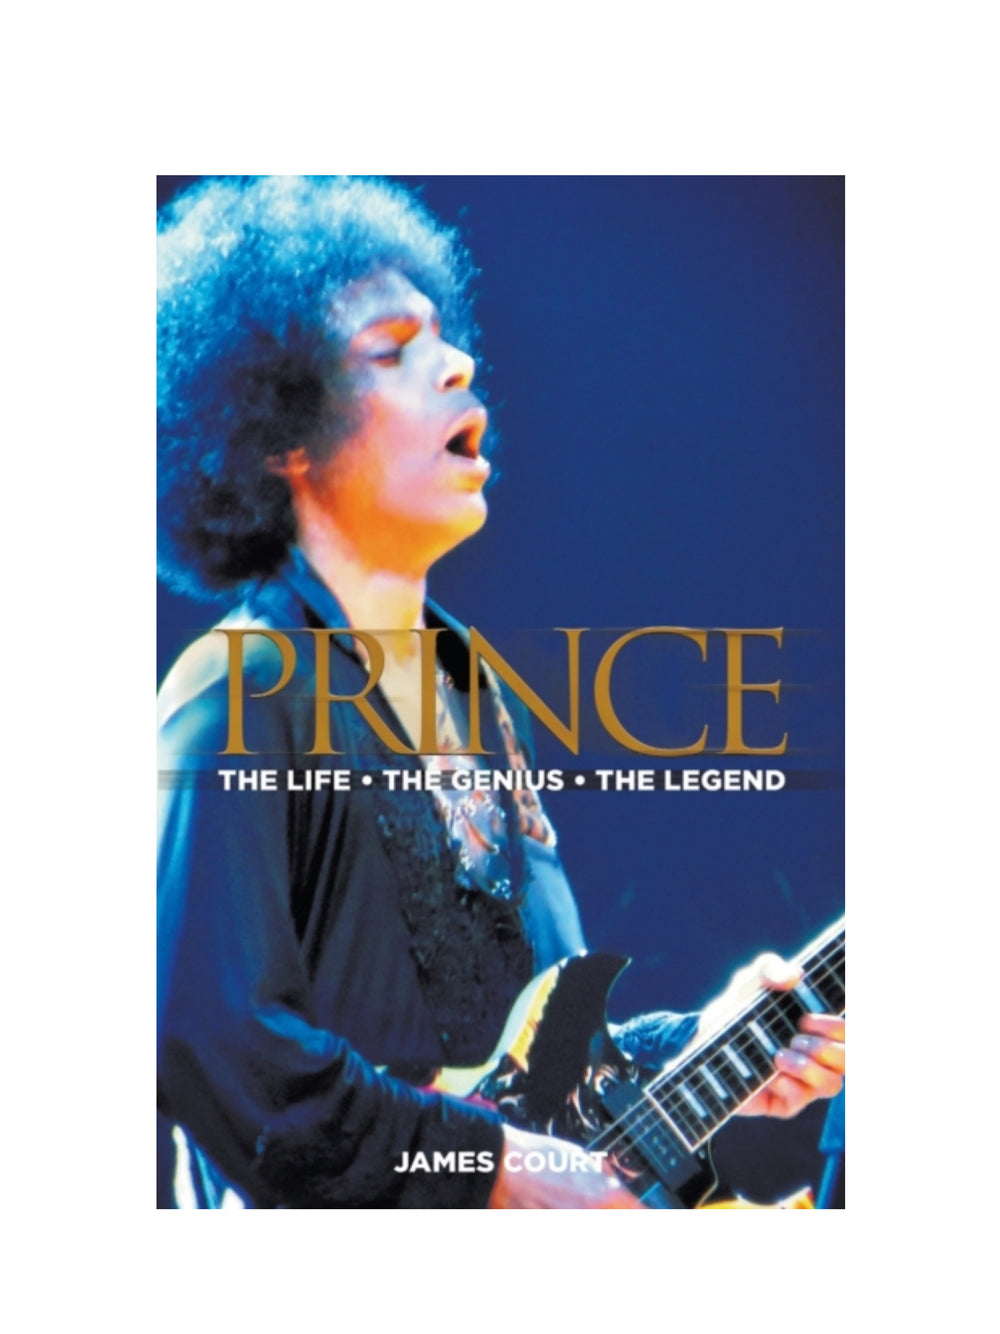 Prince – The Life The Genius The Legend James Court SB Book NEW: 2018